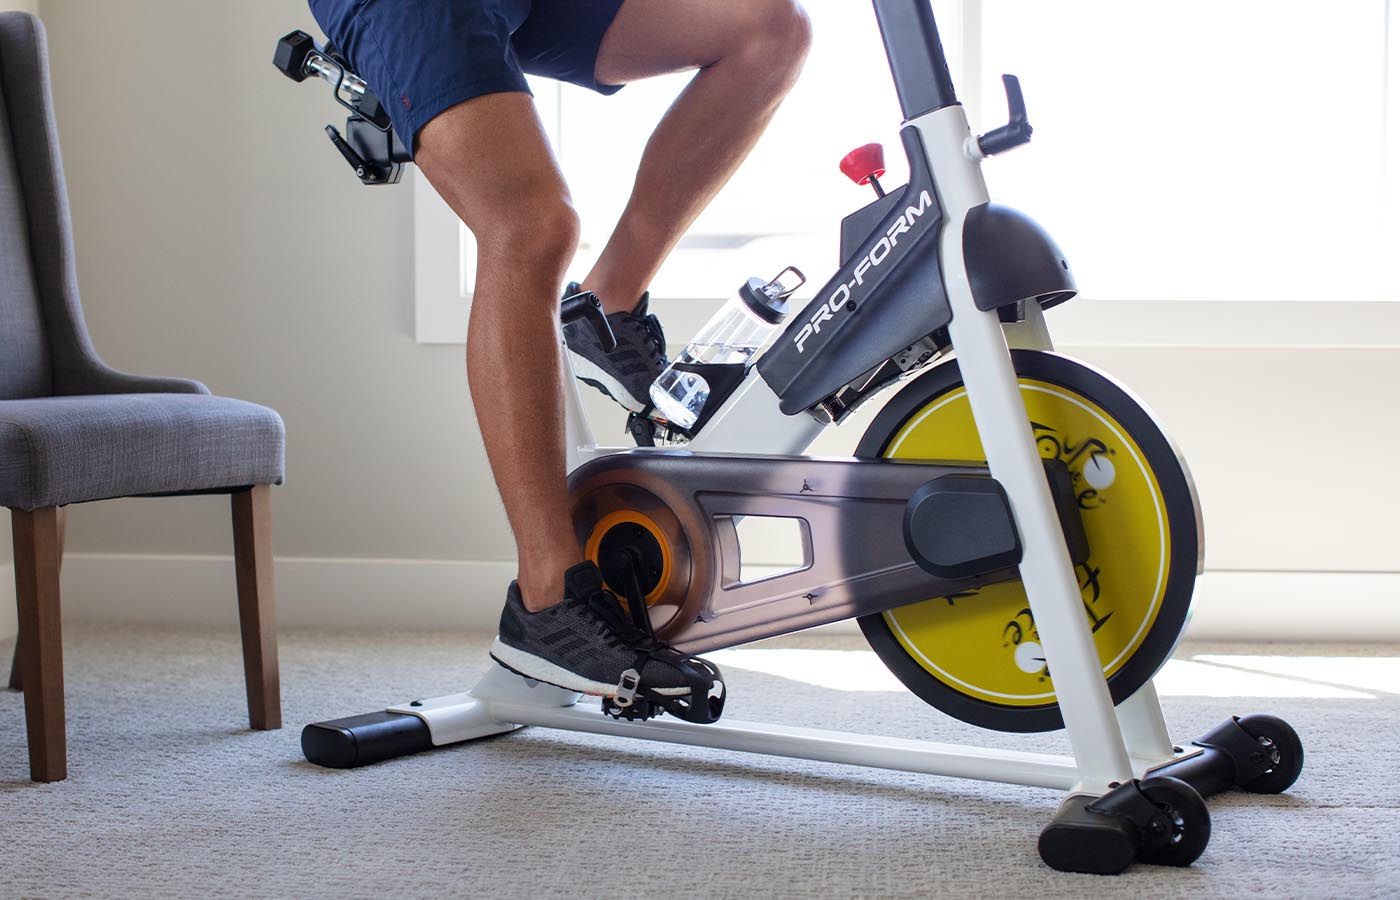 Pedals on a spin bike